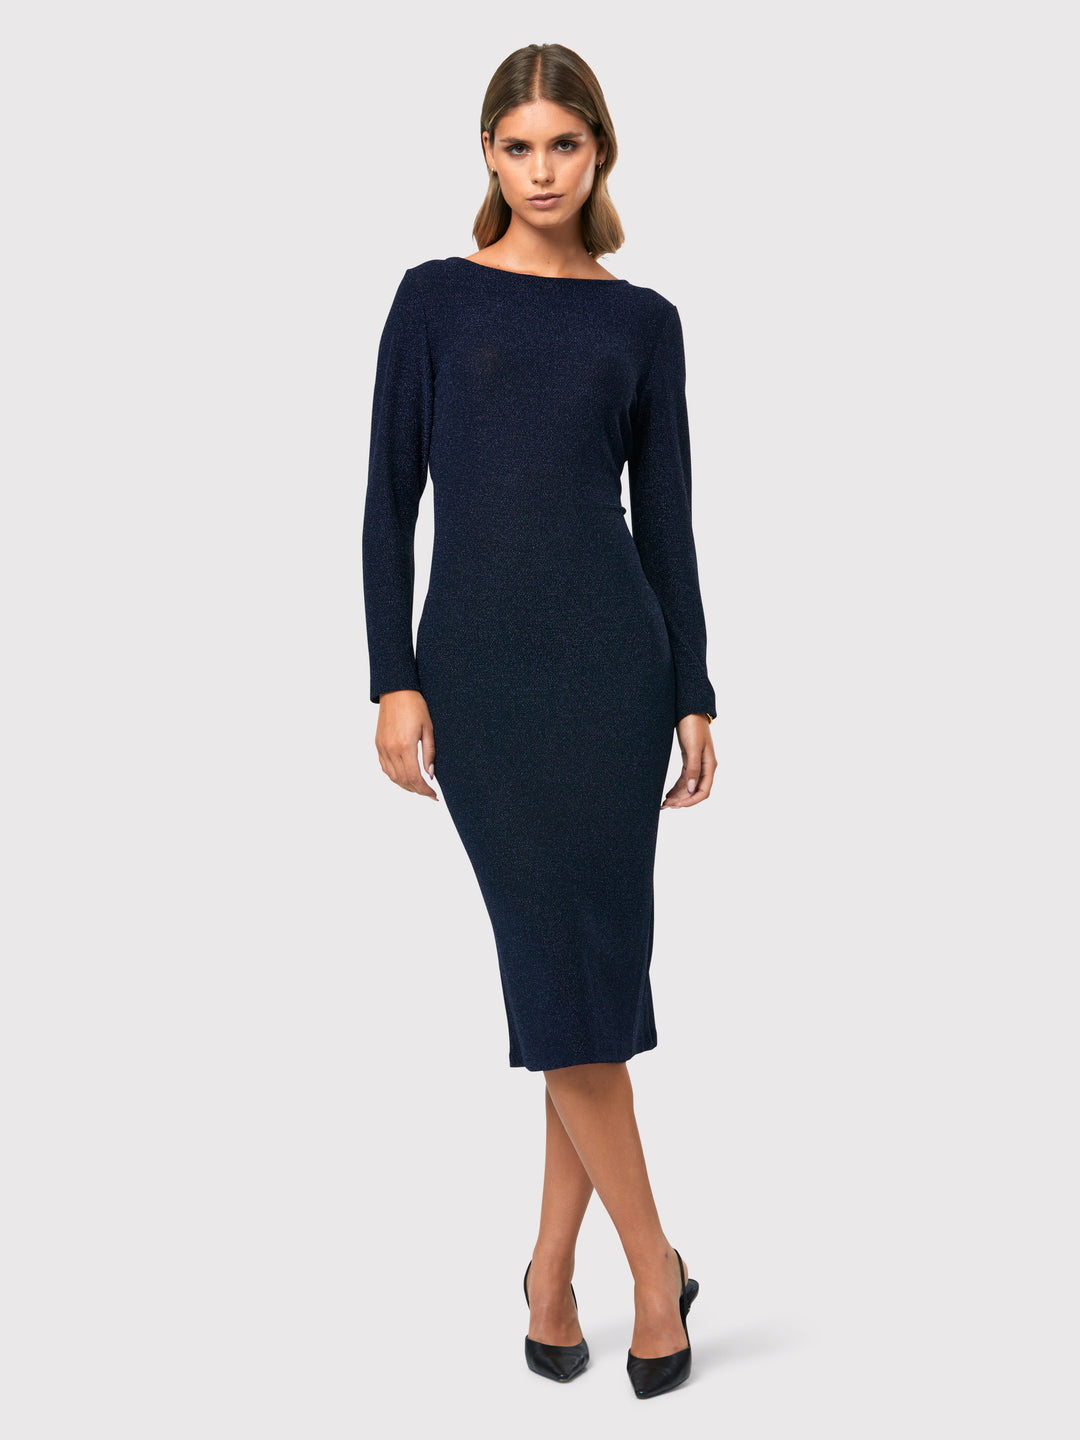 Introducing the Jamie Midnight Shimmer Dress, a captivating bodycon dress that exudes timeless elegance. This dress features super full-length sleeves, providing a sophisticated and chic look. Crafted from a sparkly navy jersey fabric, it adds a touch of glamour to your ensemble. The slash neck with a slight V-back detail adds a subtle hint of allure. 